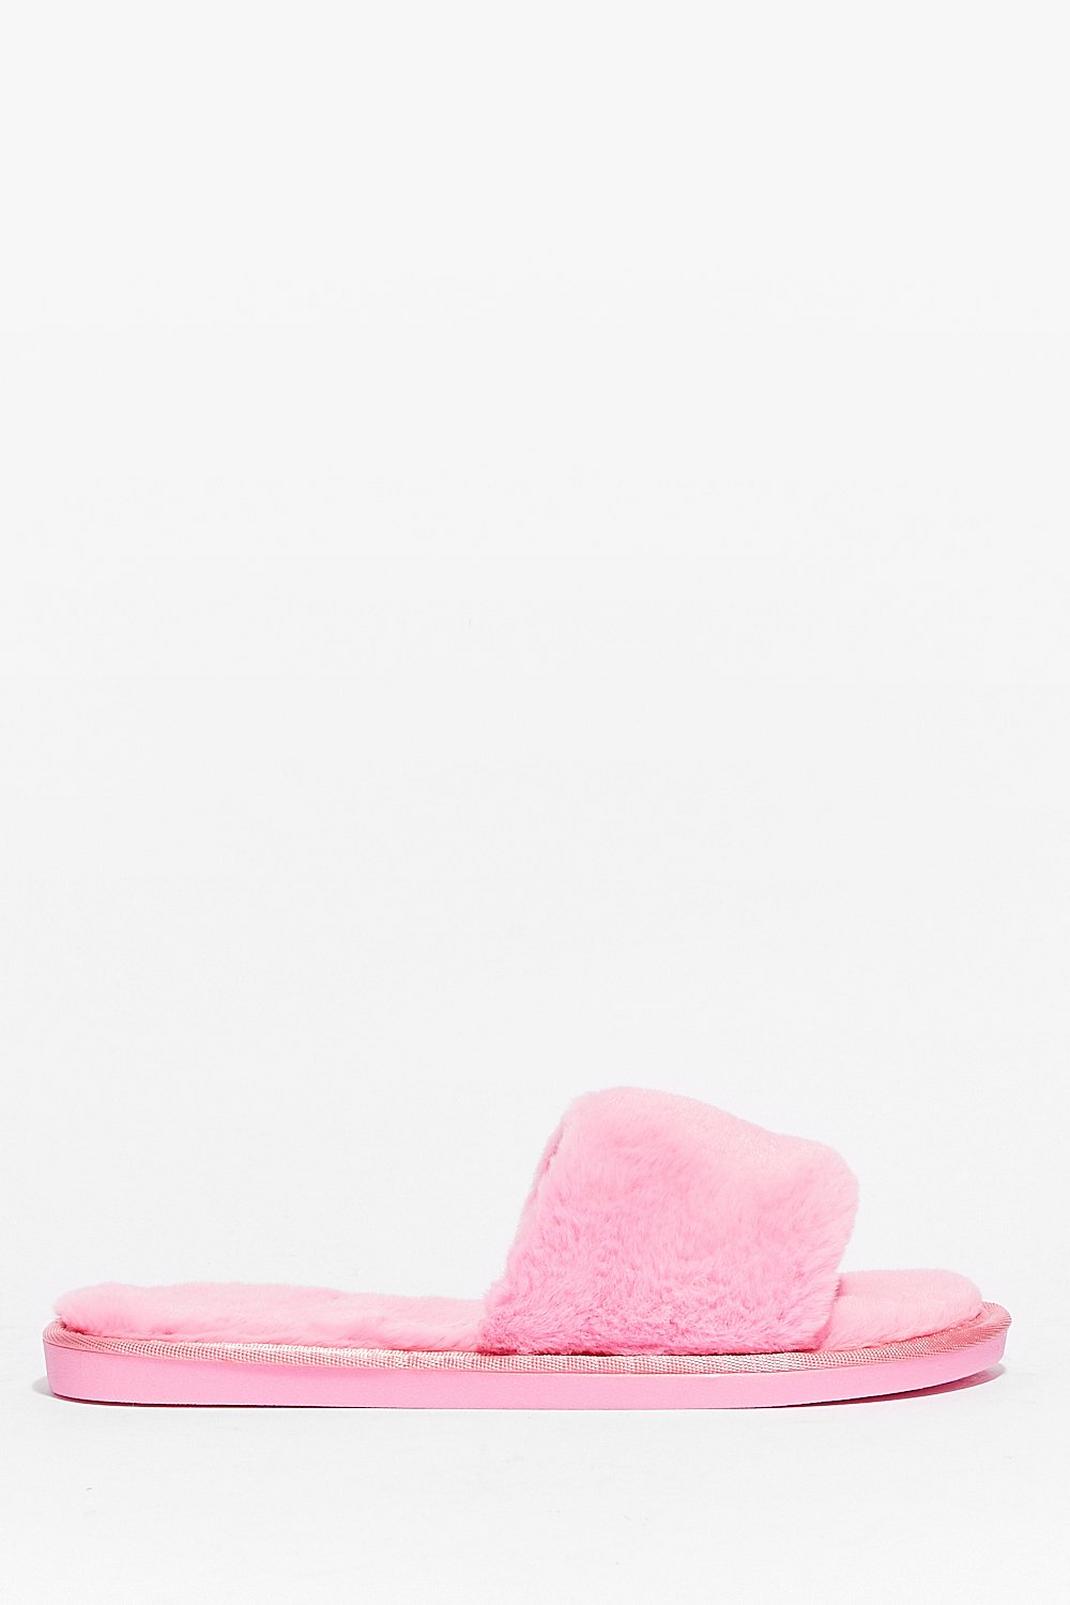 Chaussons style claquettes en fausse fourrure, Pink image number 1